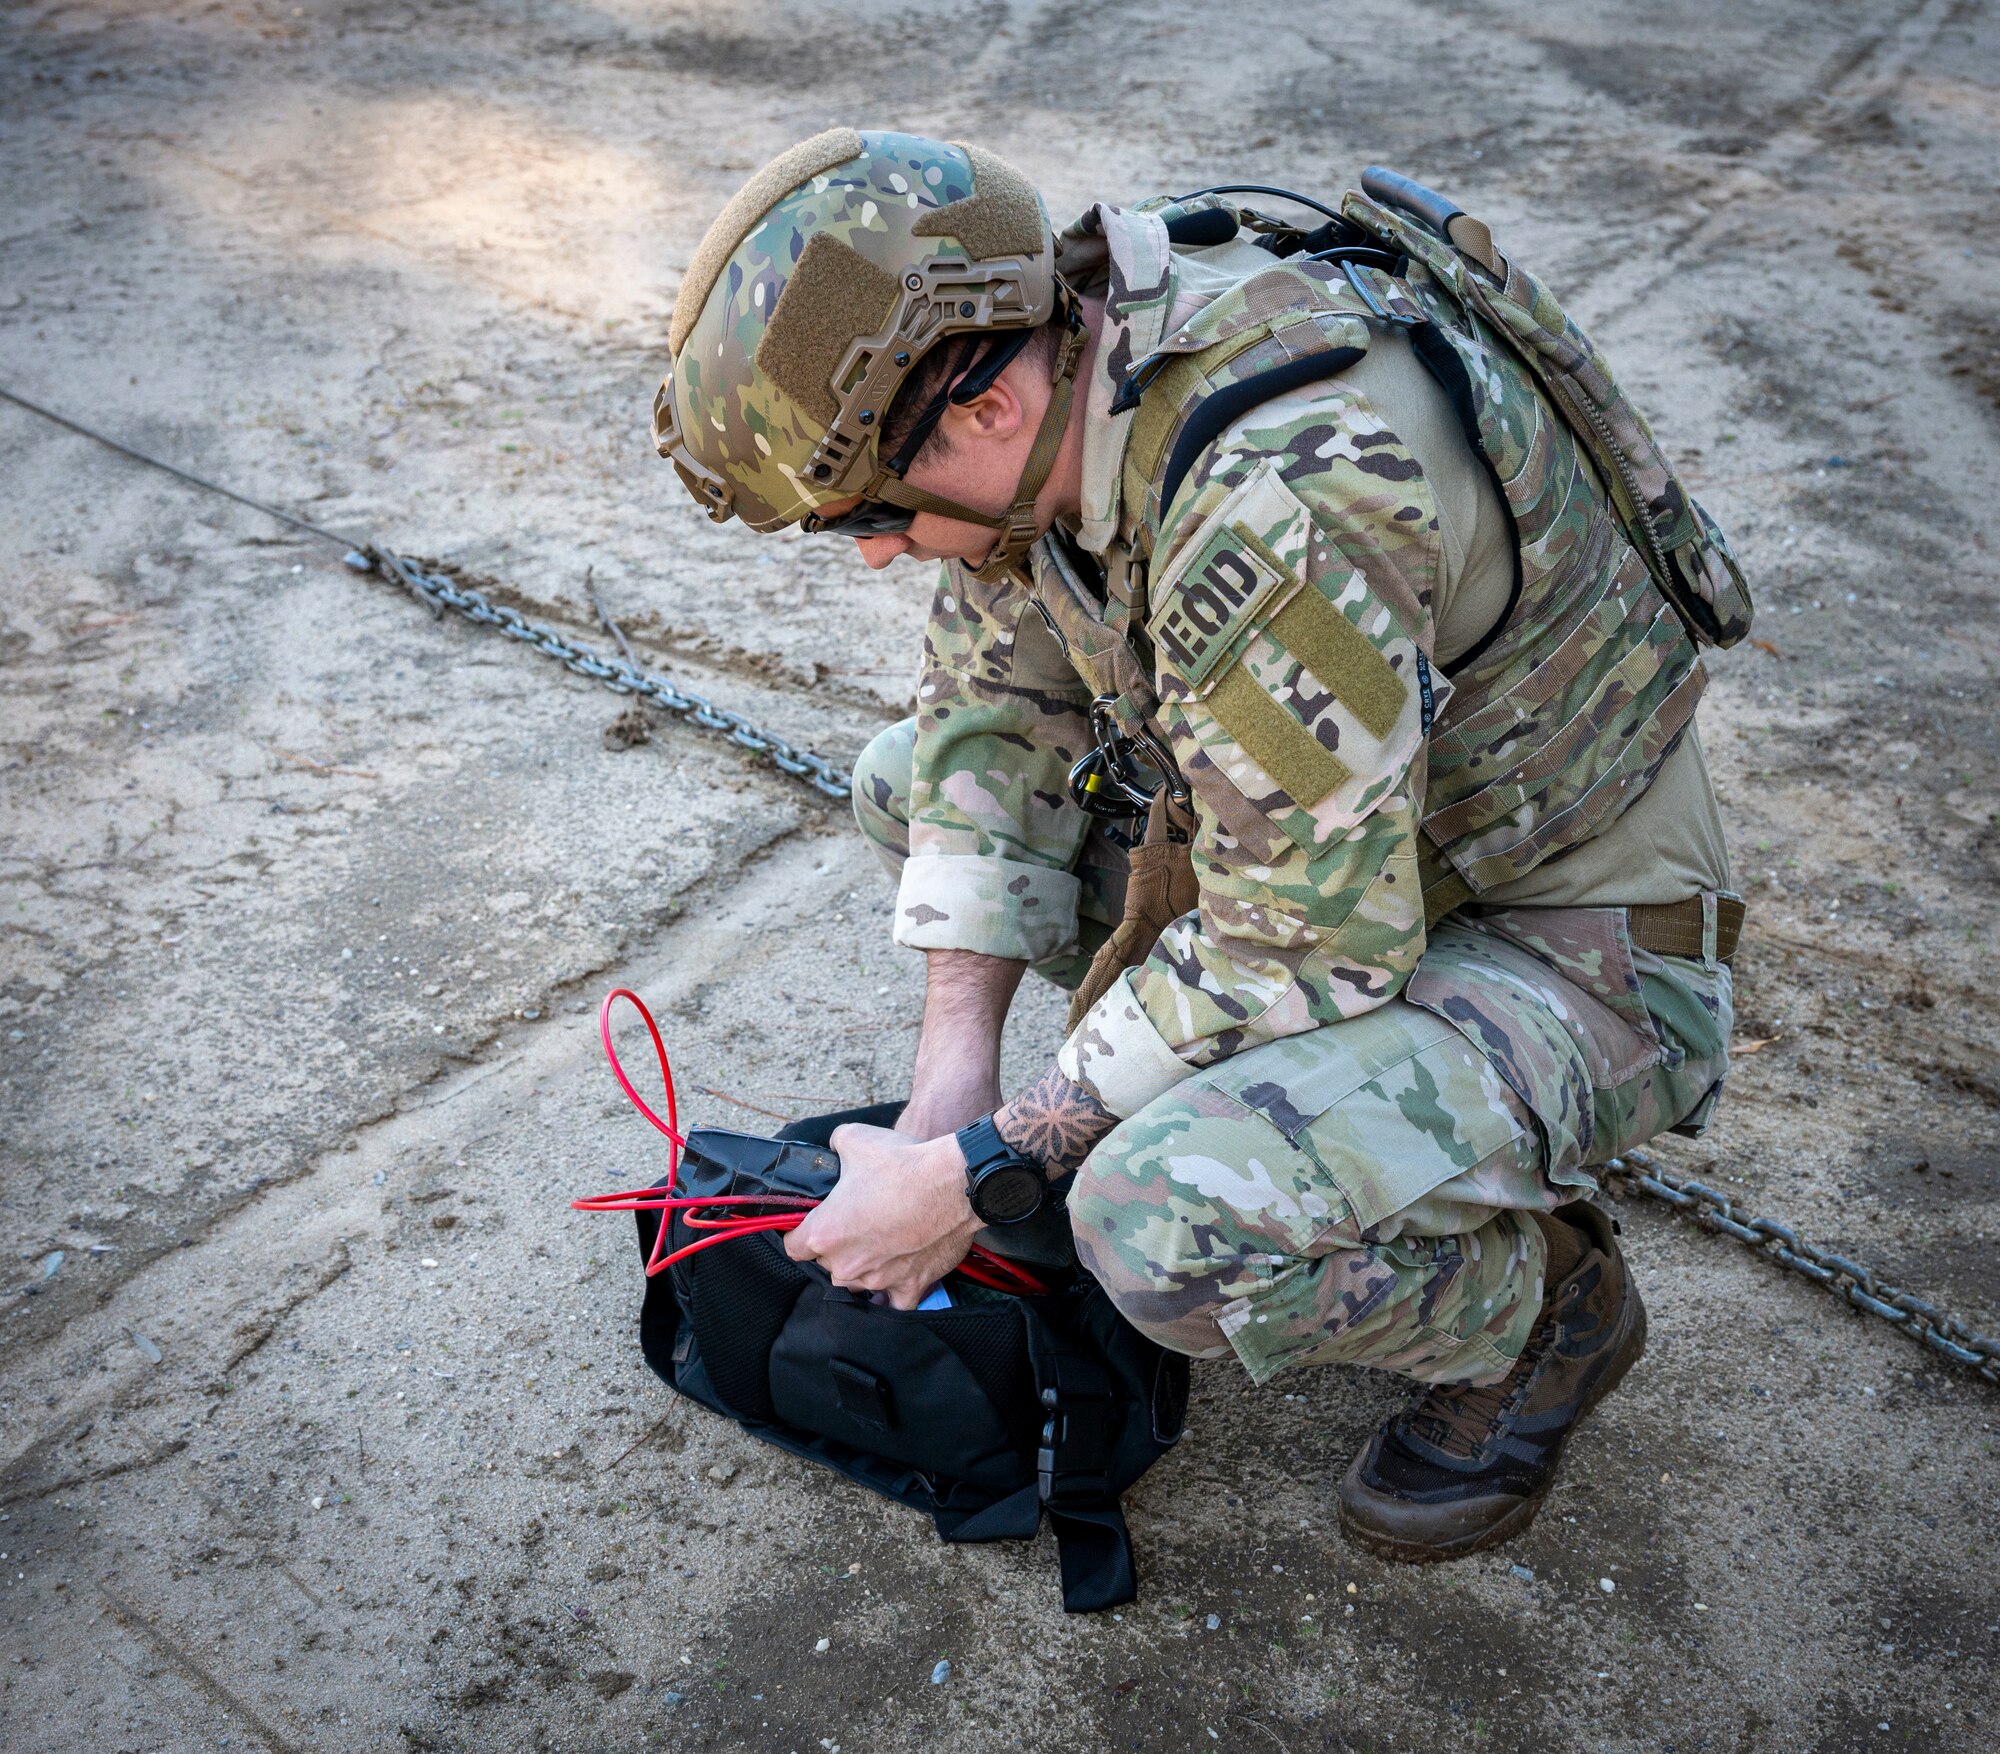 Senior Airman Nicholas Farrar, 4th Civil Engineer Squadron explosive ordnance disposal apprentice, prepares to mount a Demolition M112 onto an inert explosive during EOD training at Seymour Johnson Air Force Base, North Carolina, Dec. 1, 2022.  The 4th CES EOD unit instructs base and community members on ordnance recognition and protective measures for improvised explosive devices and conventional ordnance. (U.S. Air Force photo by Airman 1st Class Sabrina Fuller)